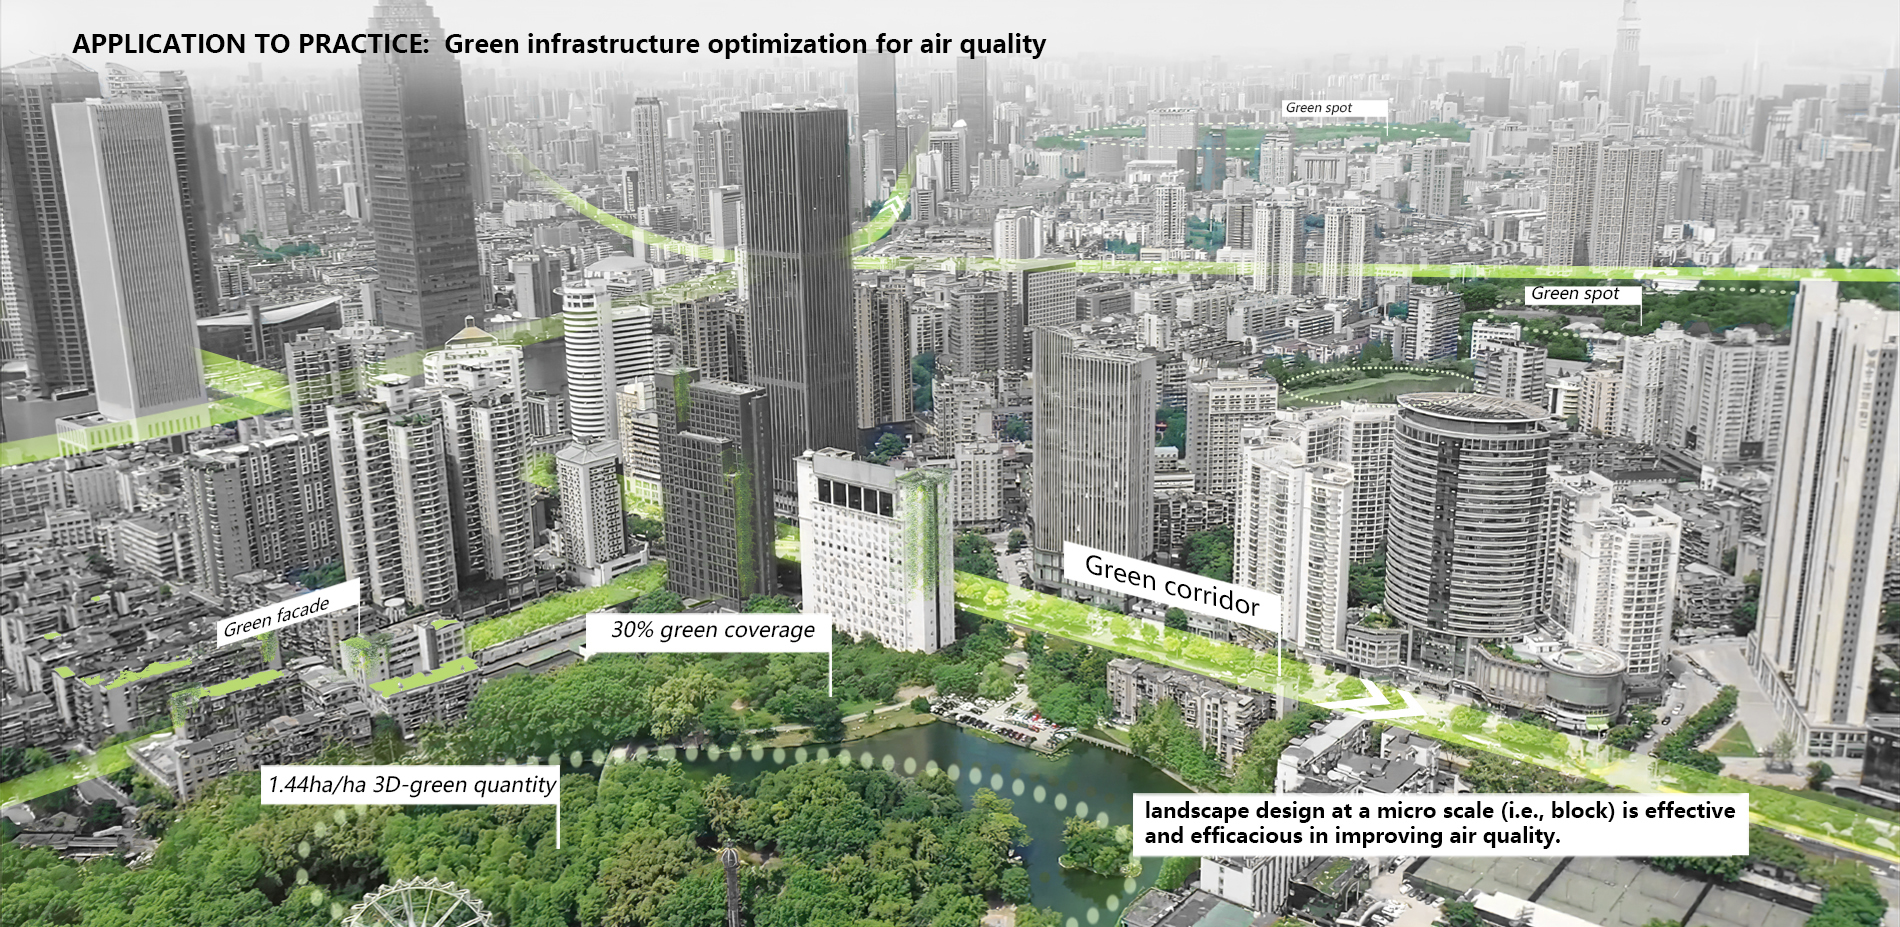 Application to practical: Green infrastructure optimization for air quality